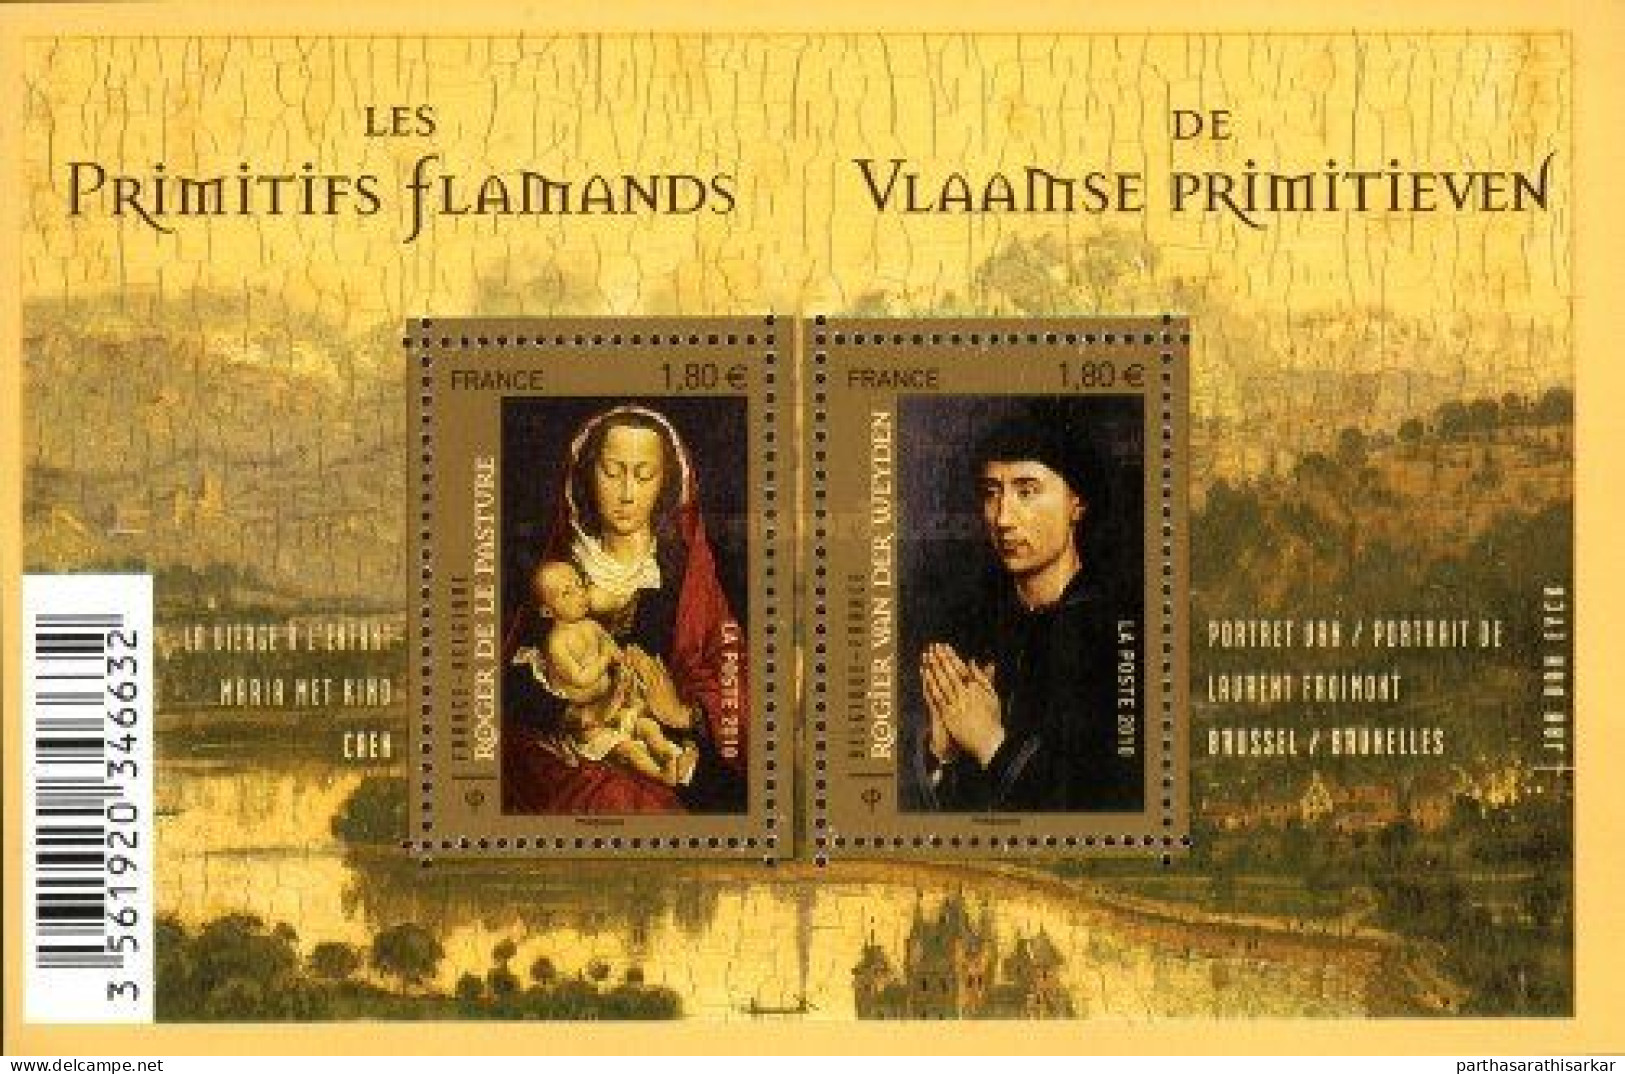 FRANCE 2010 JOINT ISSUE WITH BELGIUM EARLY NETHERLANDISH PAINTINGS MINIATURE SHEET MS MNH - Emissions Communes